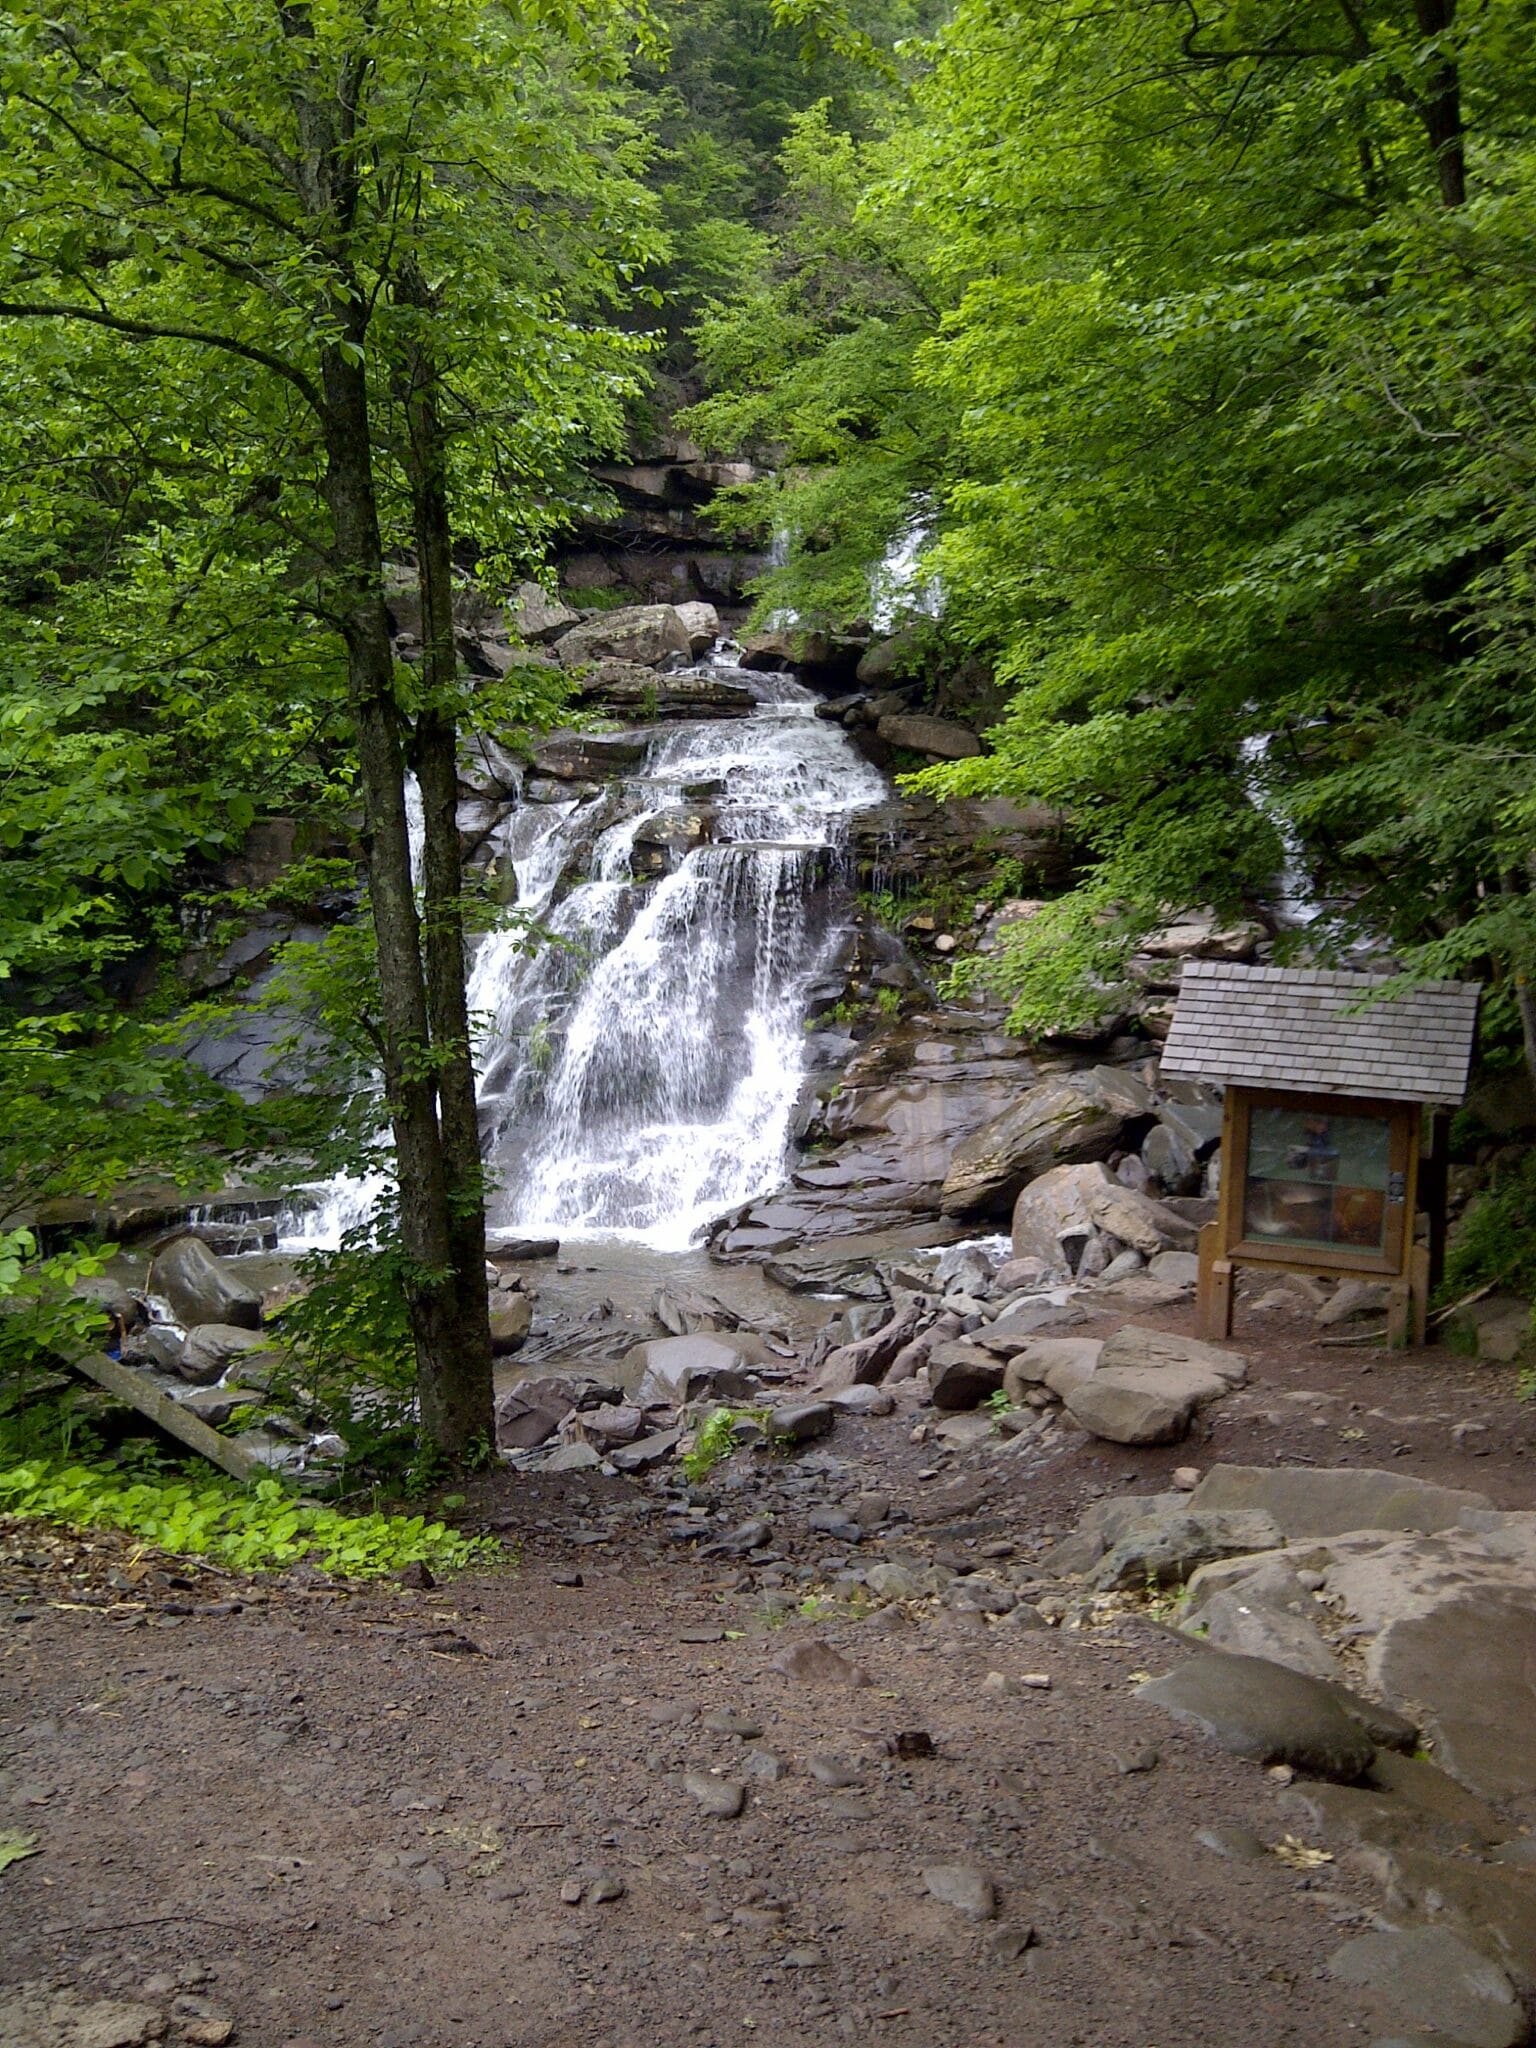 Kaaterskill Falls in the Catskill Mountains of eastern New York